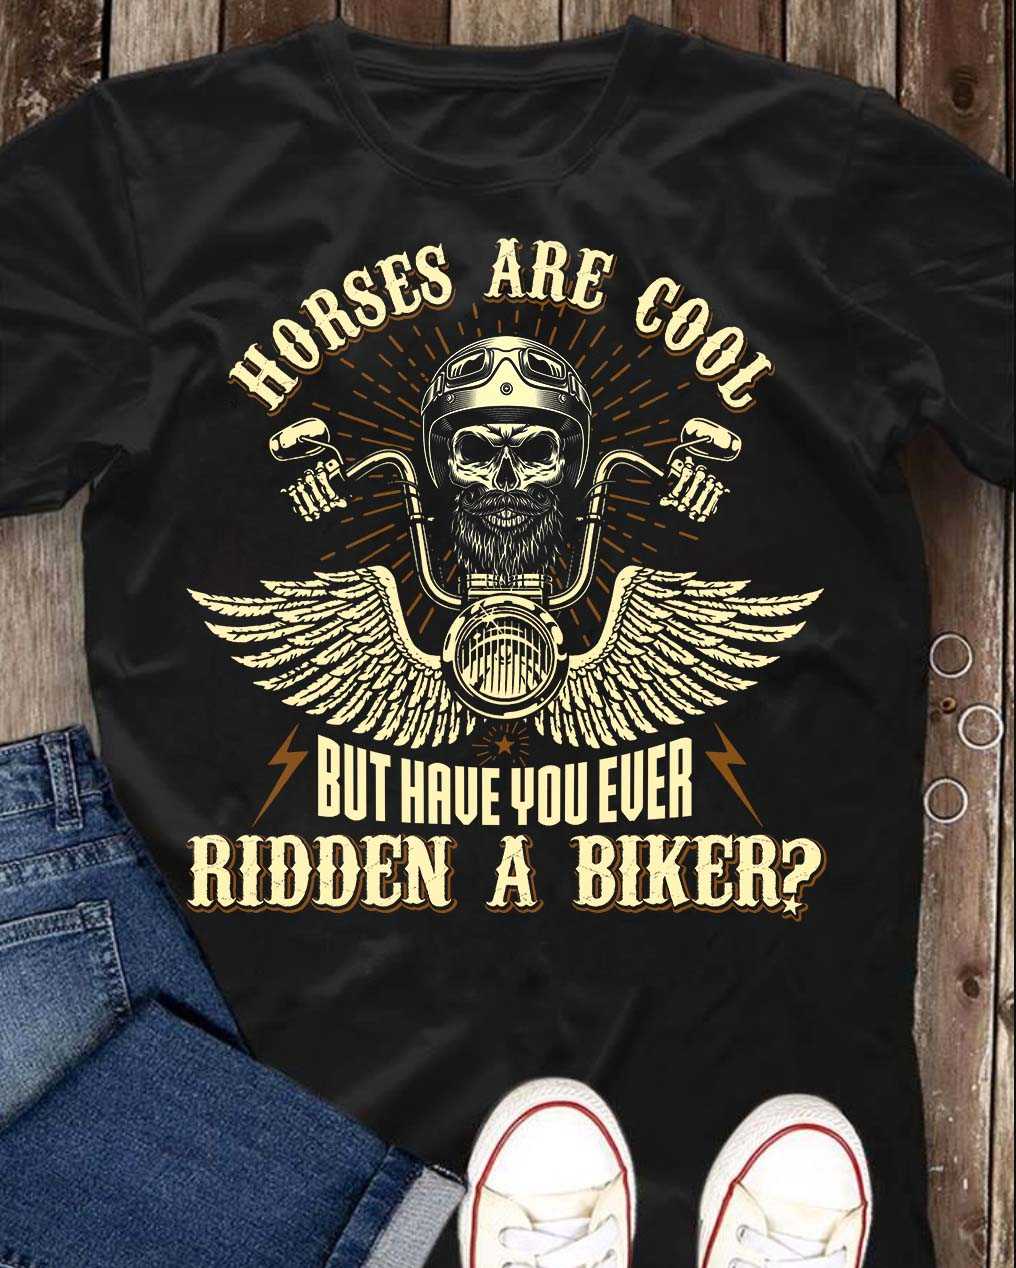 Horses are cool but have you ever ridden a biker - Skull biker, motorcycle with wings